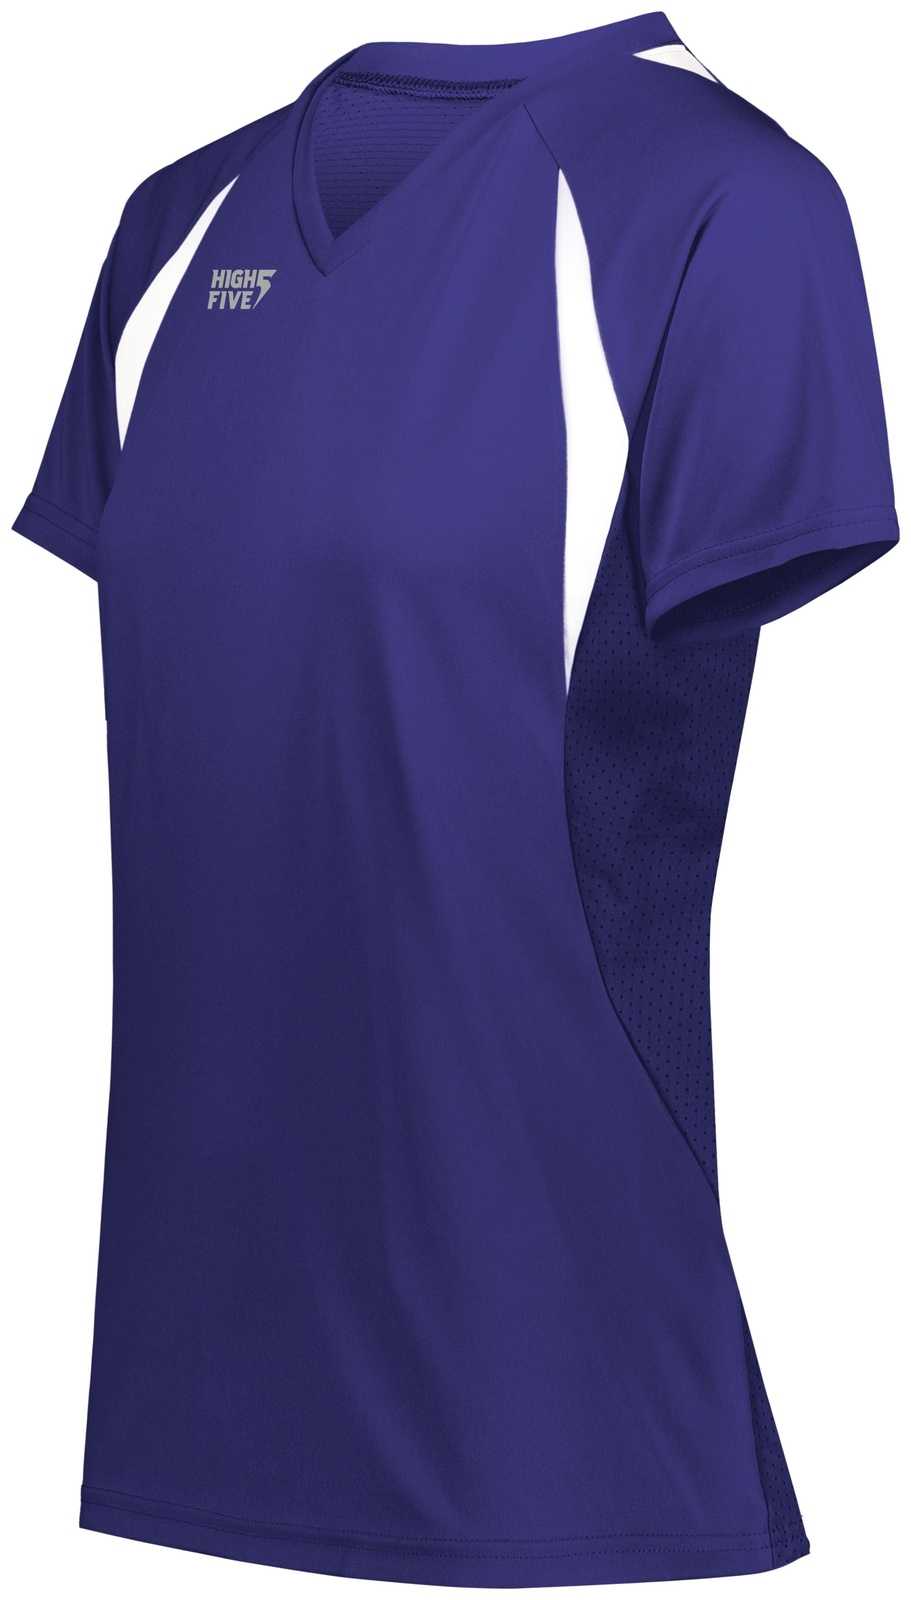 High Five 342232 Ladies Color Cross Jersey - Purple White - HIT a Double